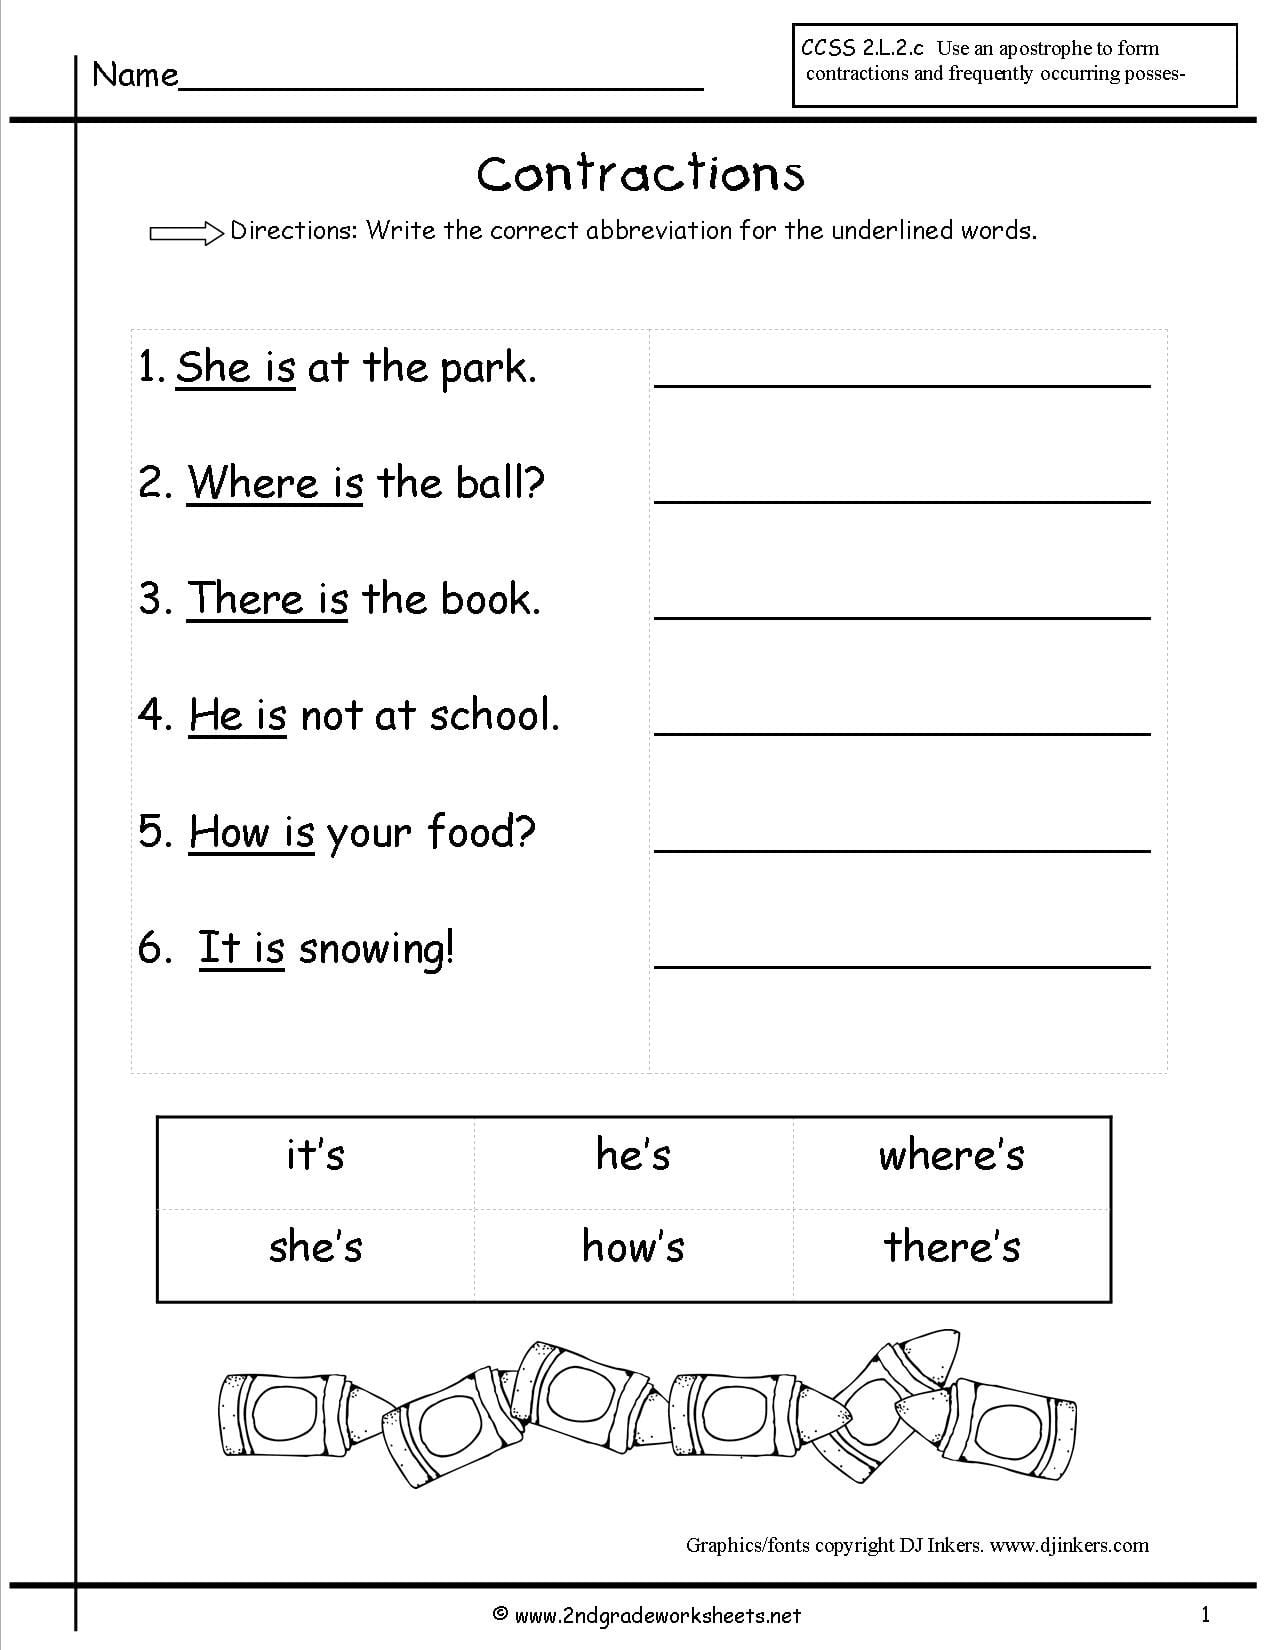 contractions-worksheet-pdf-db-excel